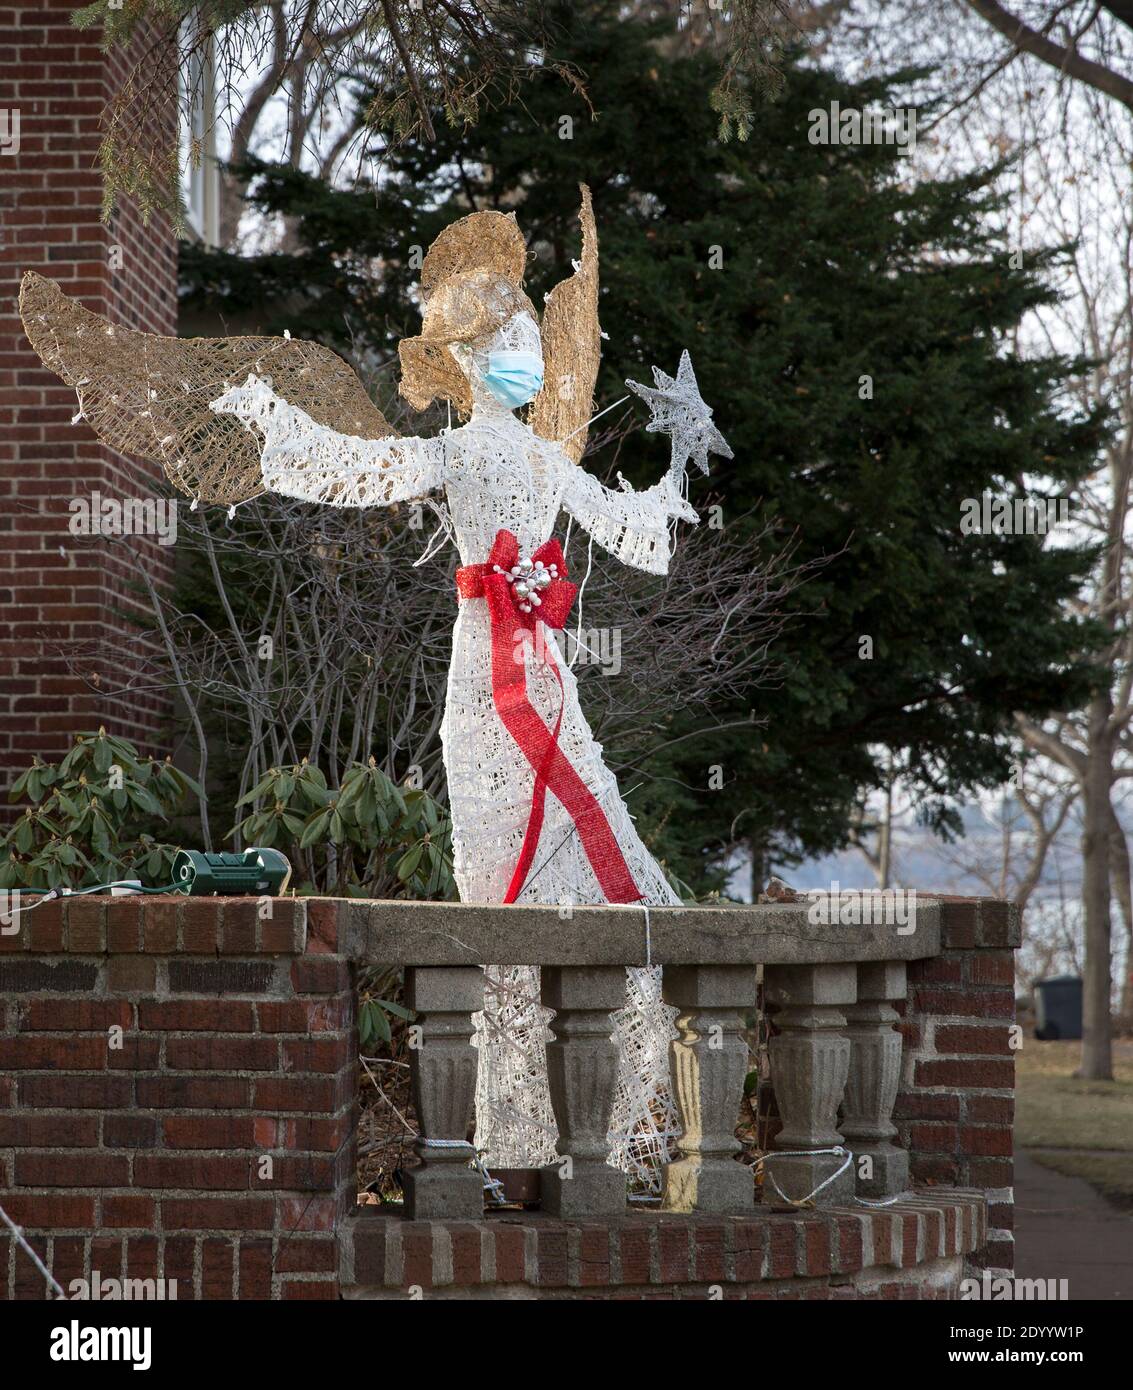 A Christmas yard lawn ornament of an angel wearing a face mask during the Covid 19 pandemic of 2020 Stock Photo